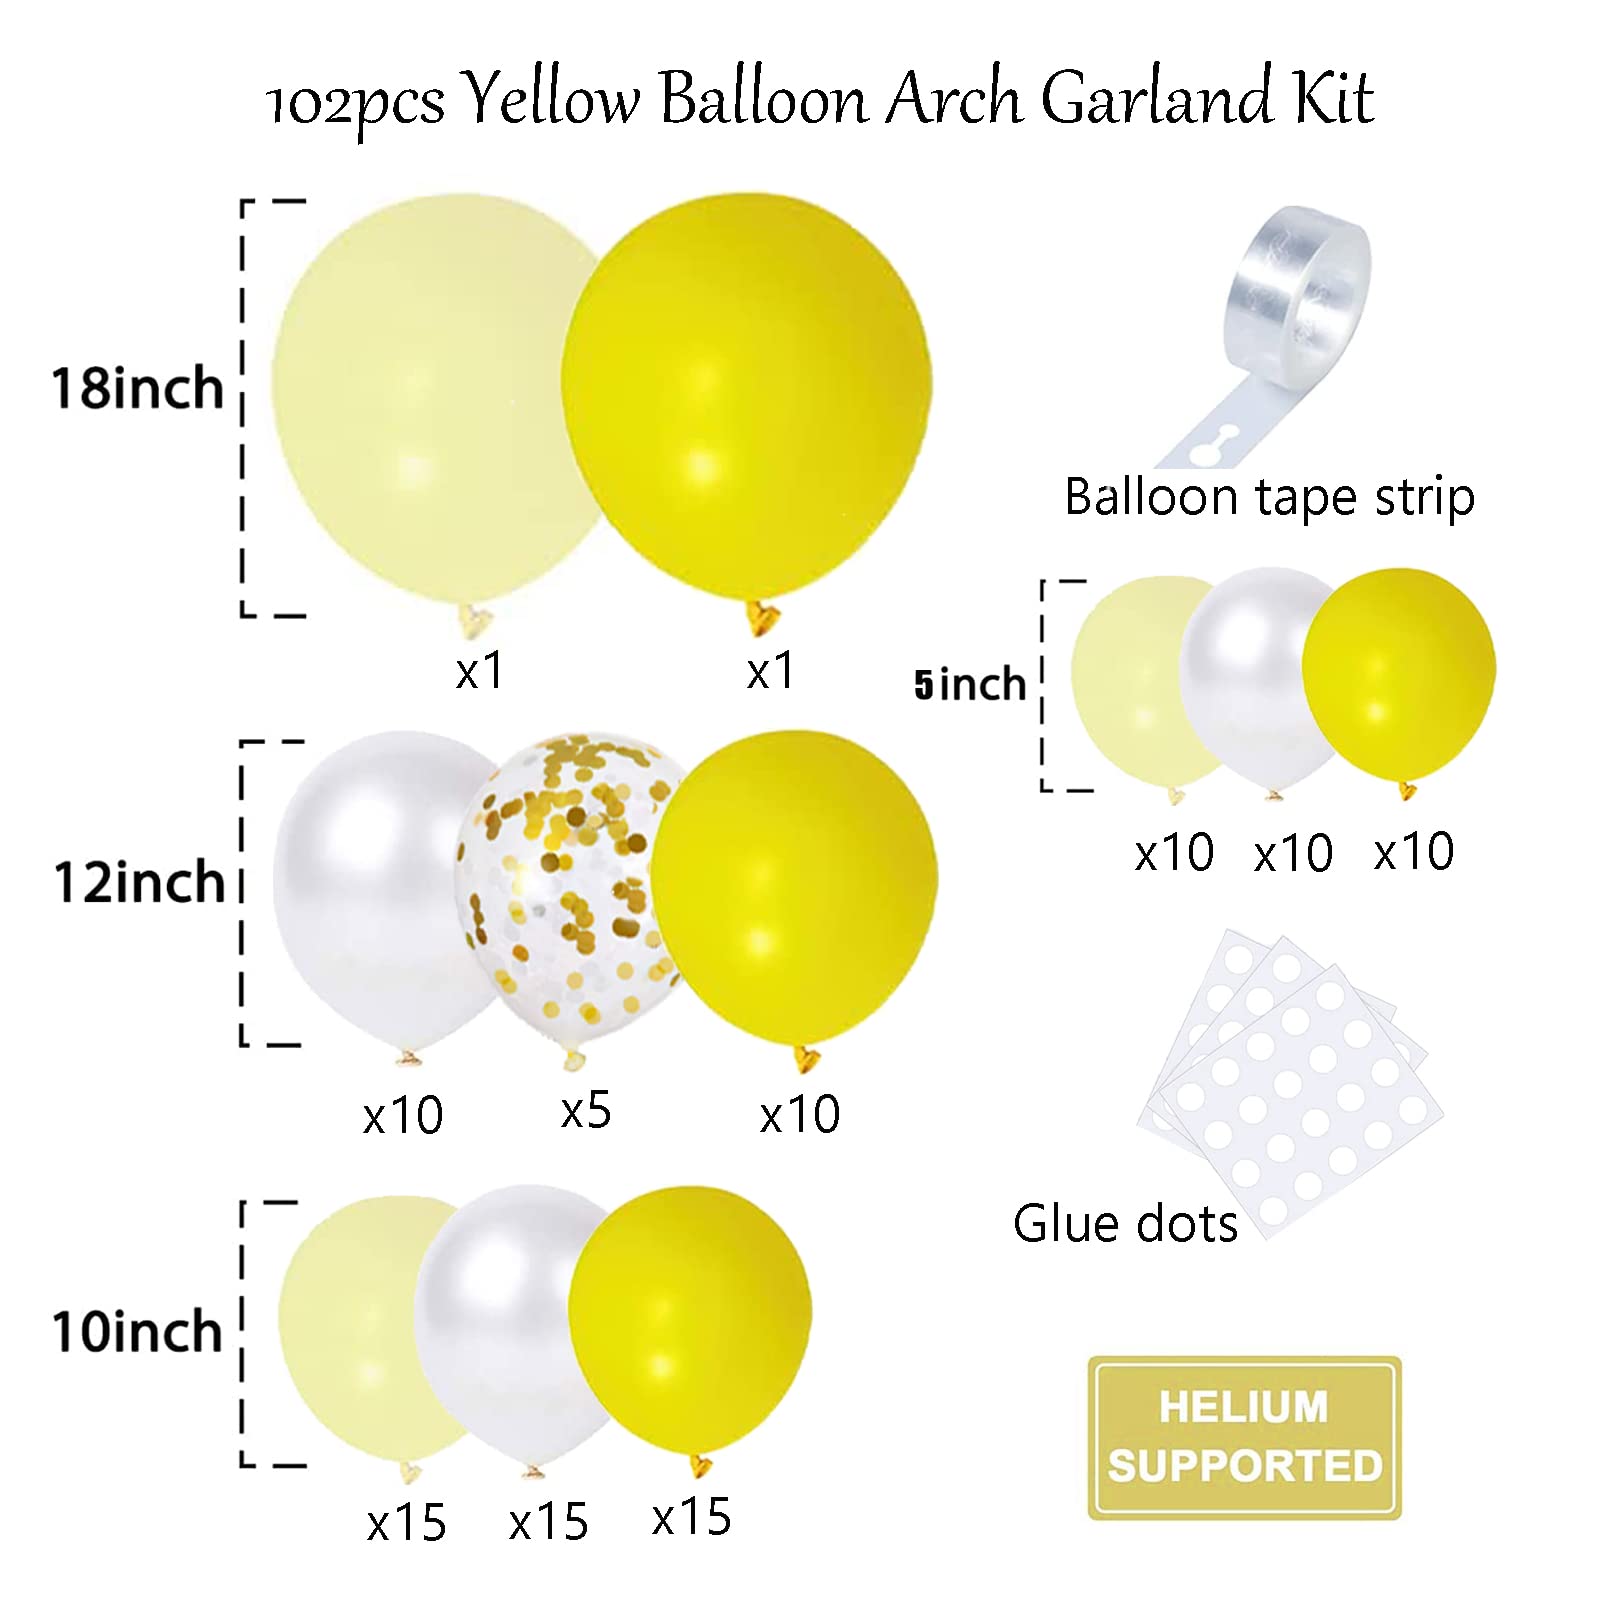 Yellow Balloons Garland Kit, 102pcs Pastel Yellow White Gold Confetti Balloons with 18 + 12 + 10 + 5 Inch for Sunflower Honey Bee Theme Birthday Baby Shower Gender Reveal Party Supplies Decorations